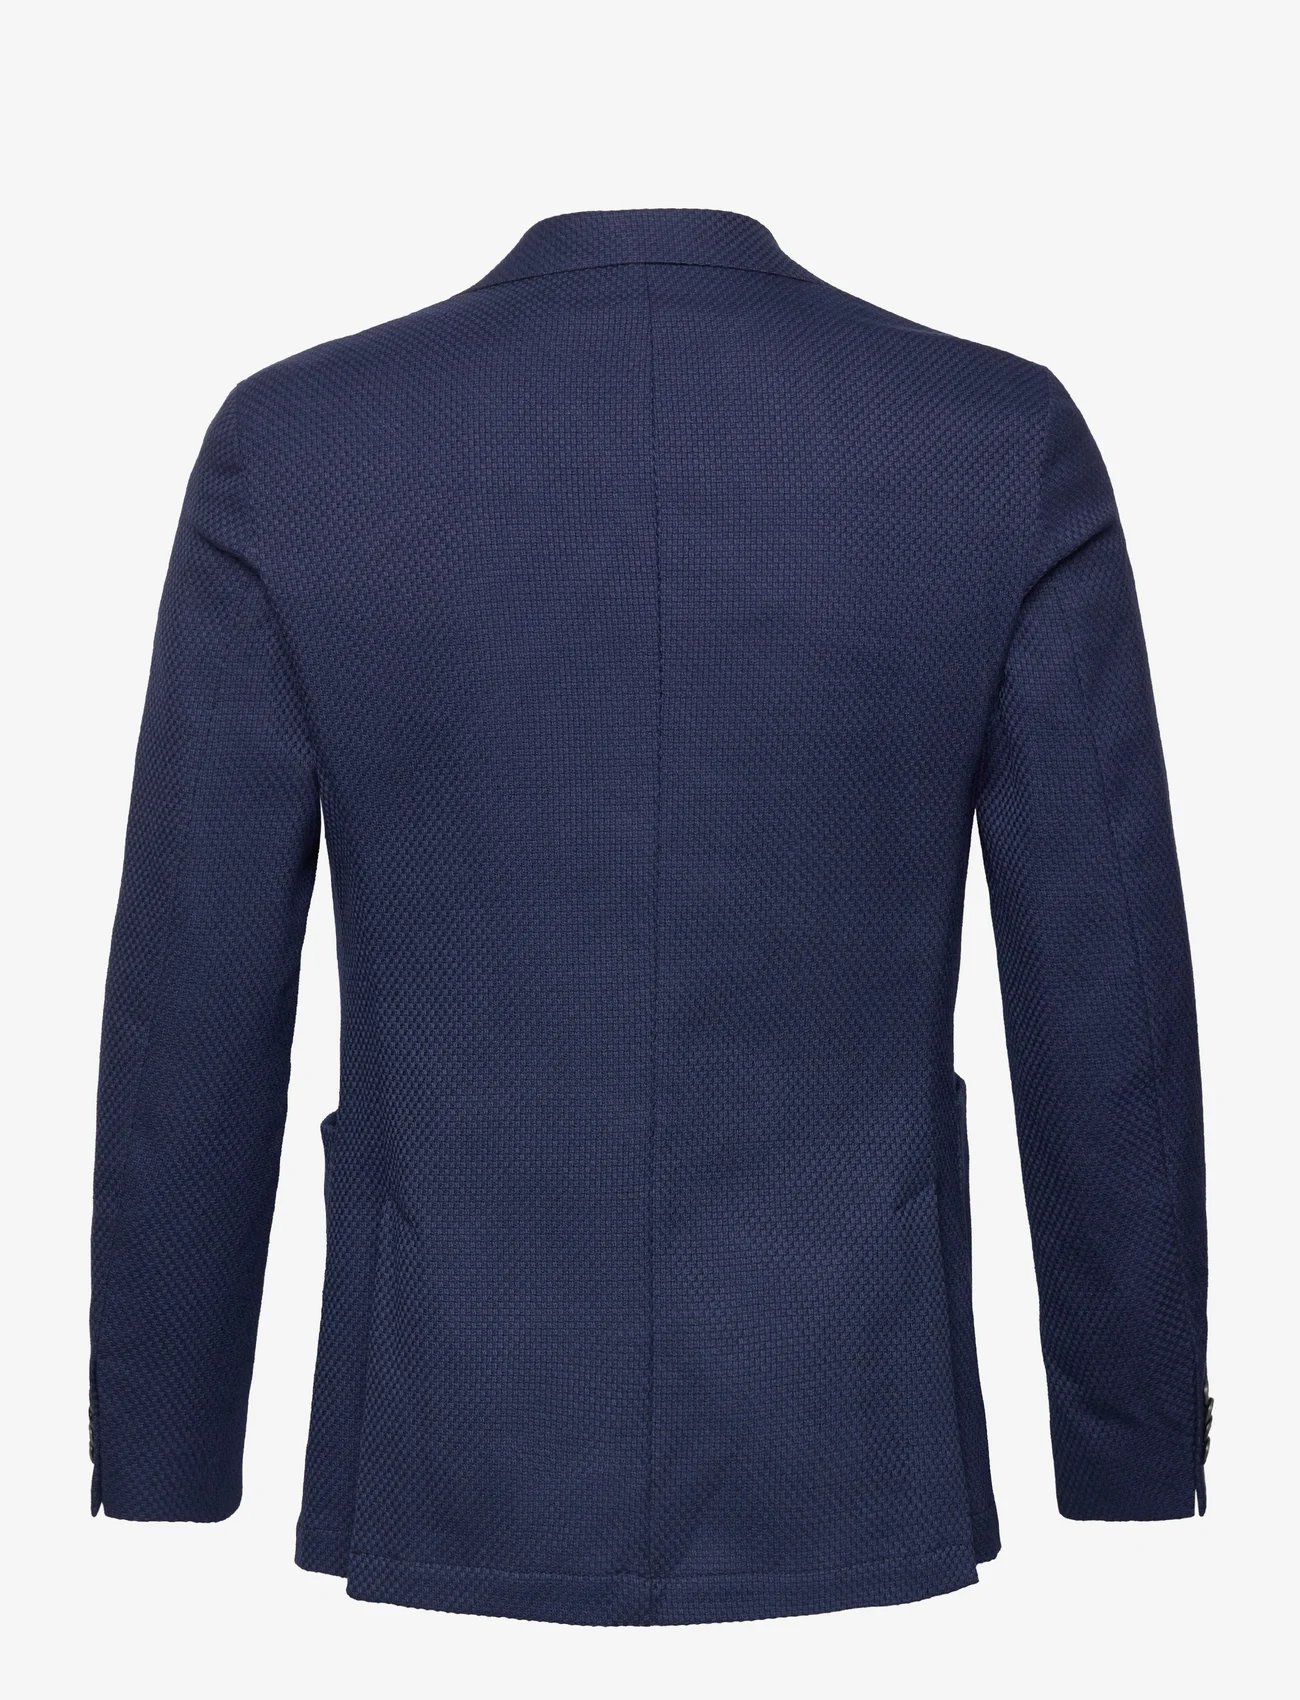 SIR of Sweden - Malone Jacket - double breasted blazers - blue - 1